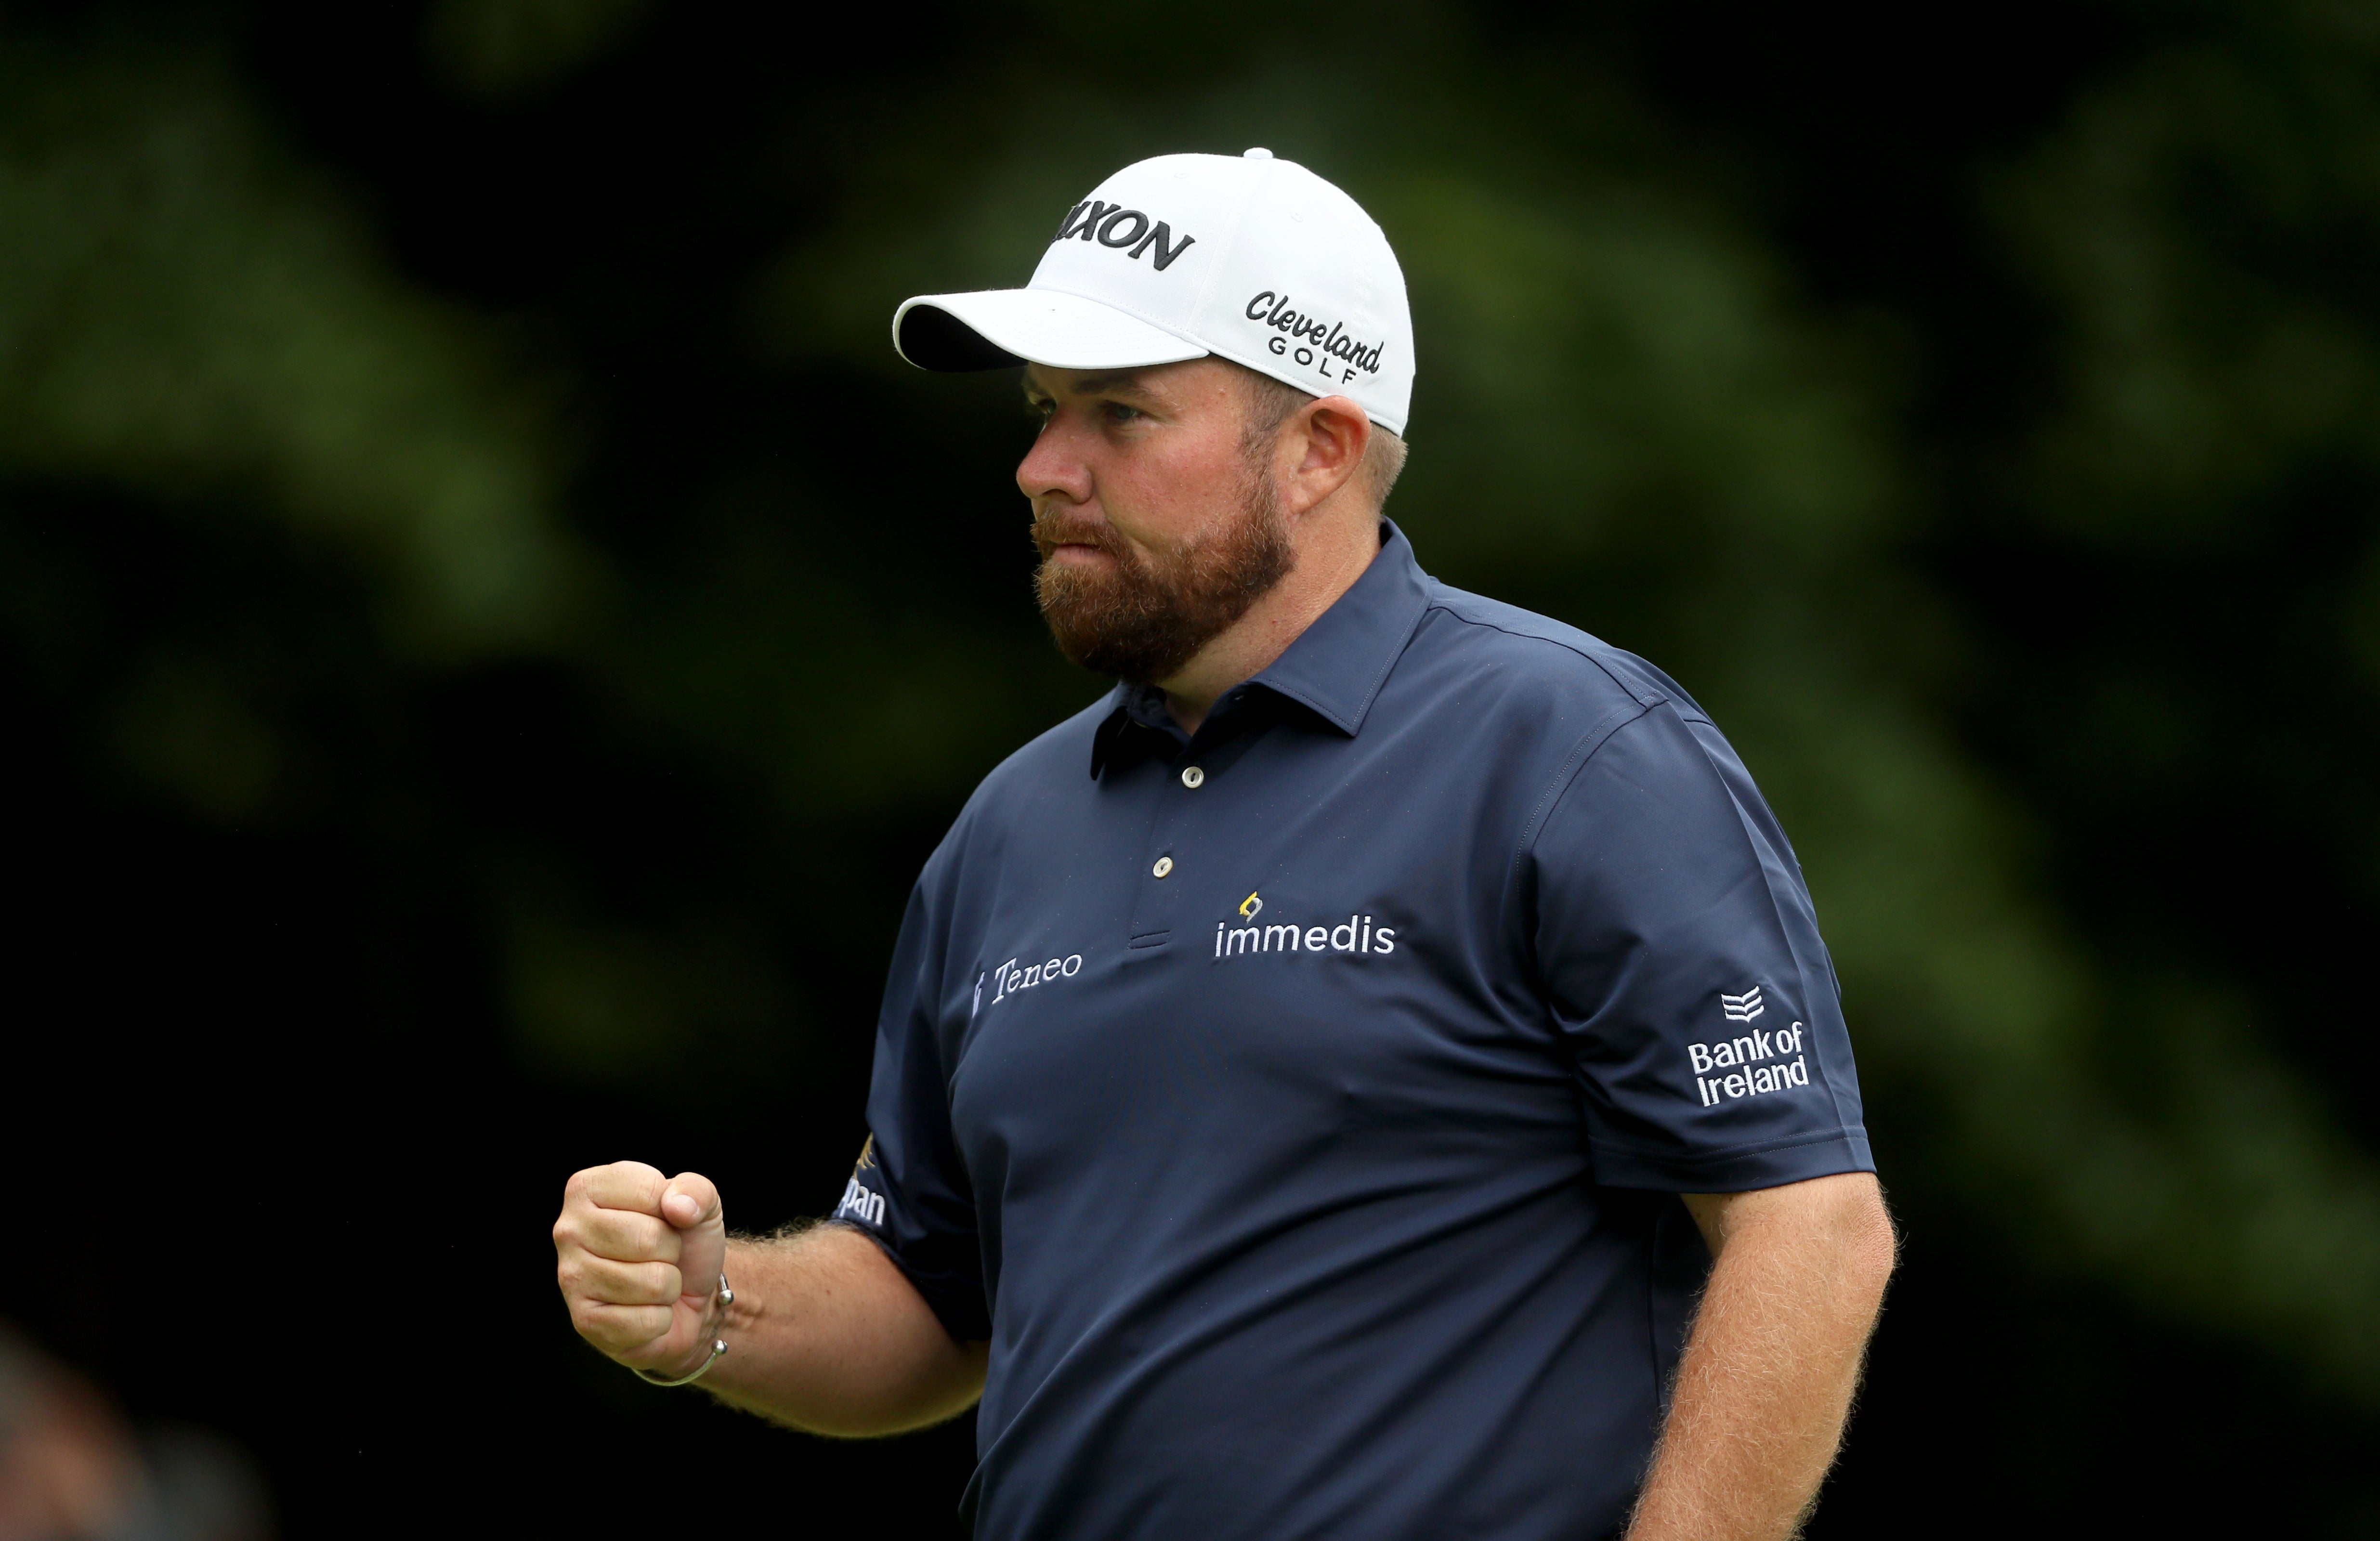 Shane Lowry will finally defend his Open title at Royal St George's